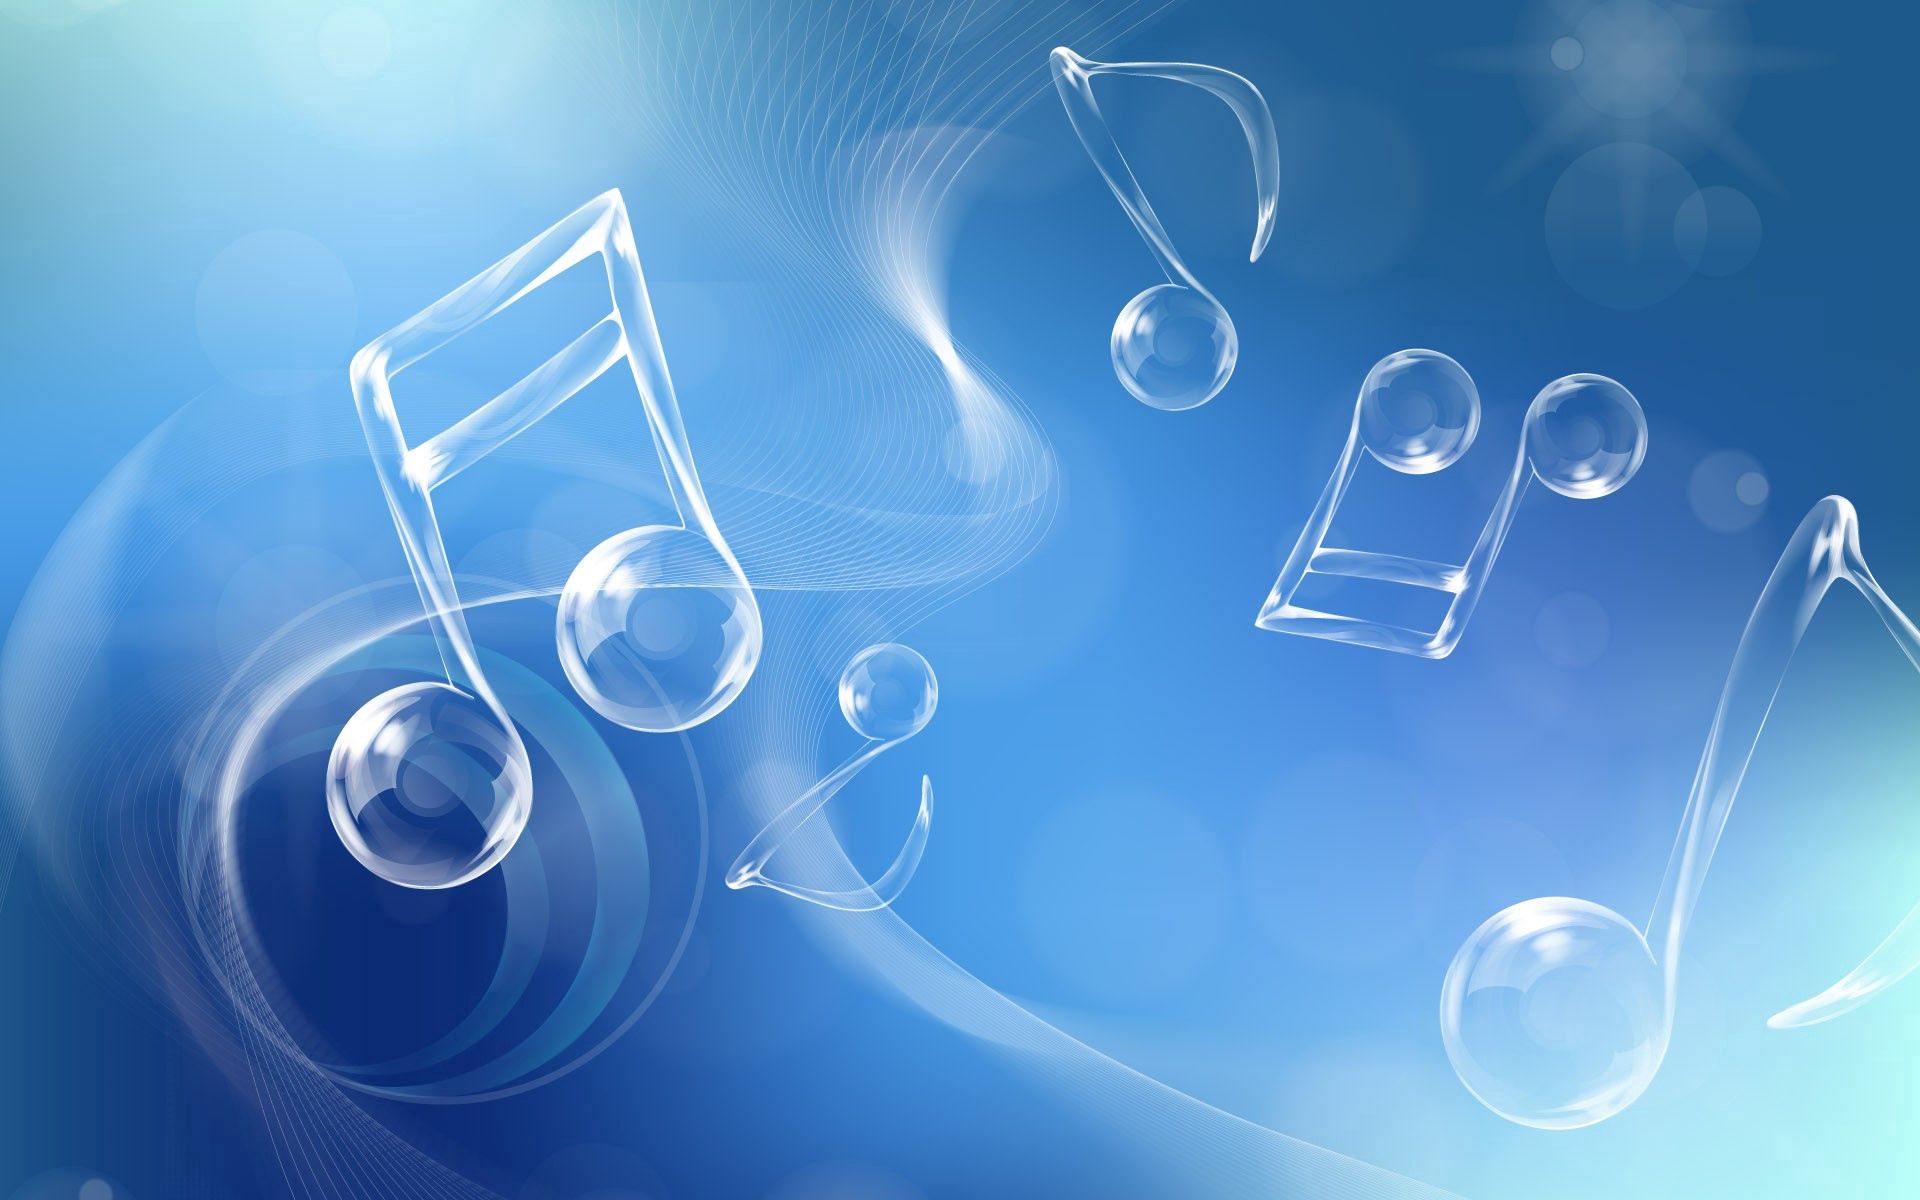 music, notes, white, abstract, blue, shapes, shape Free Stock Photo